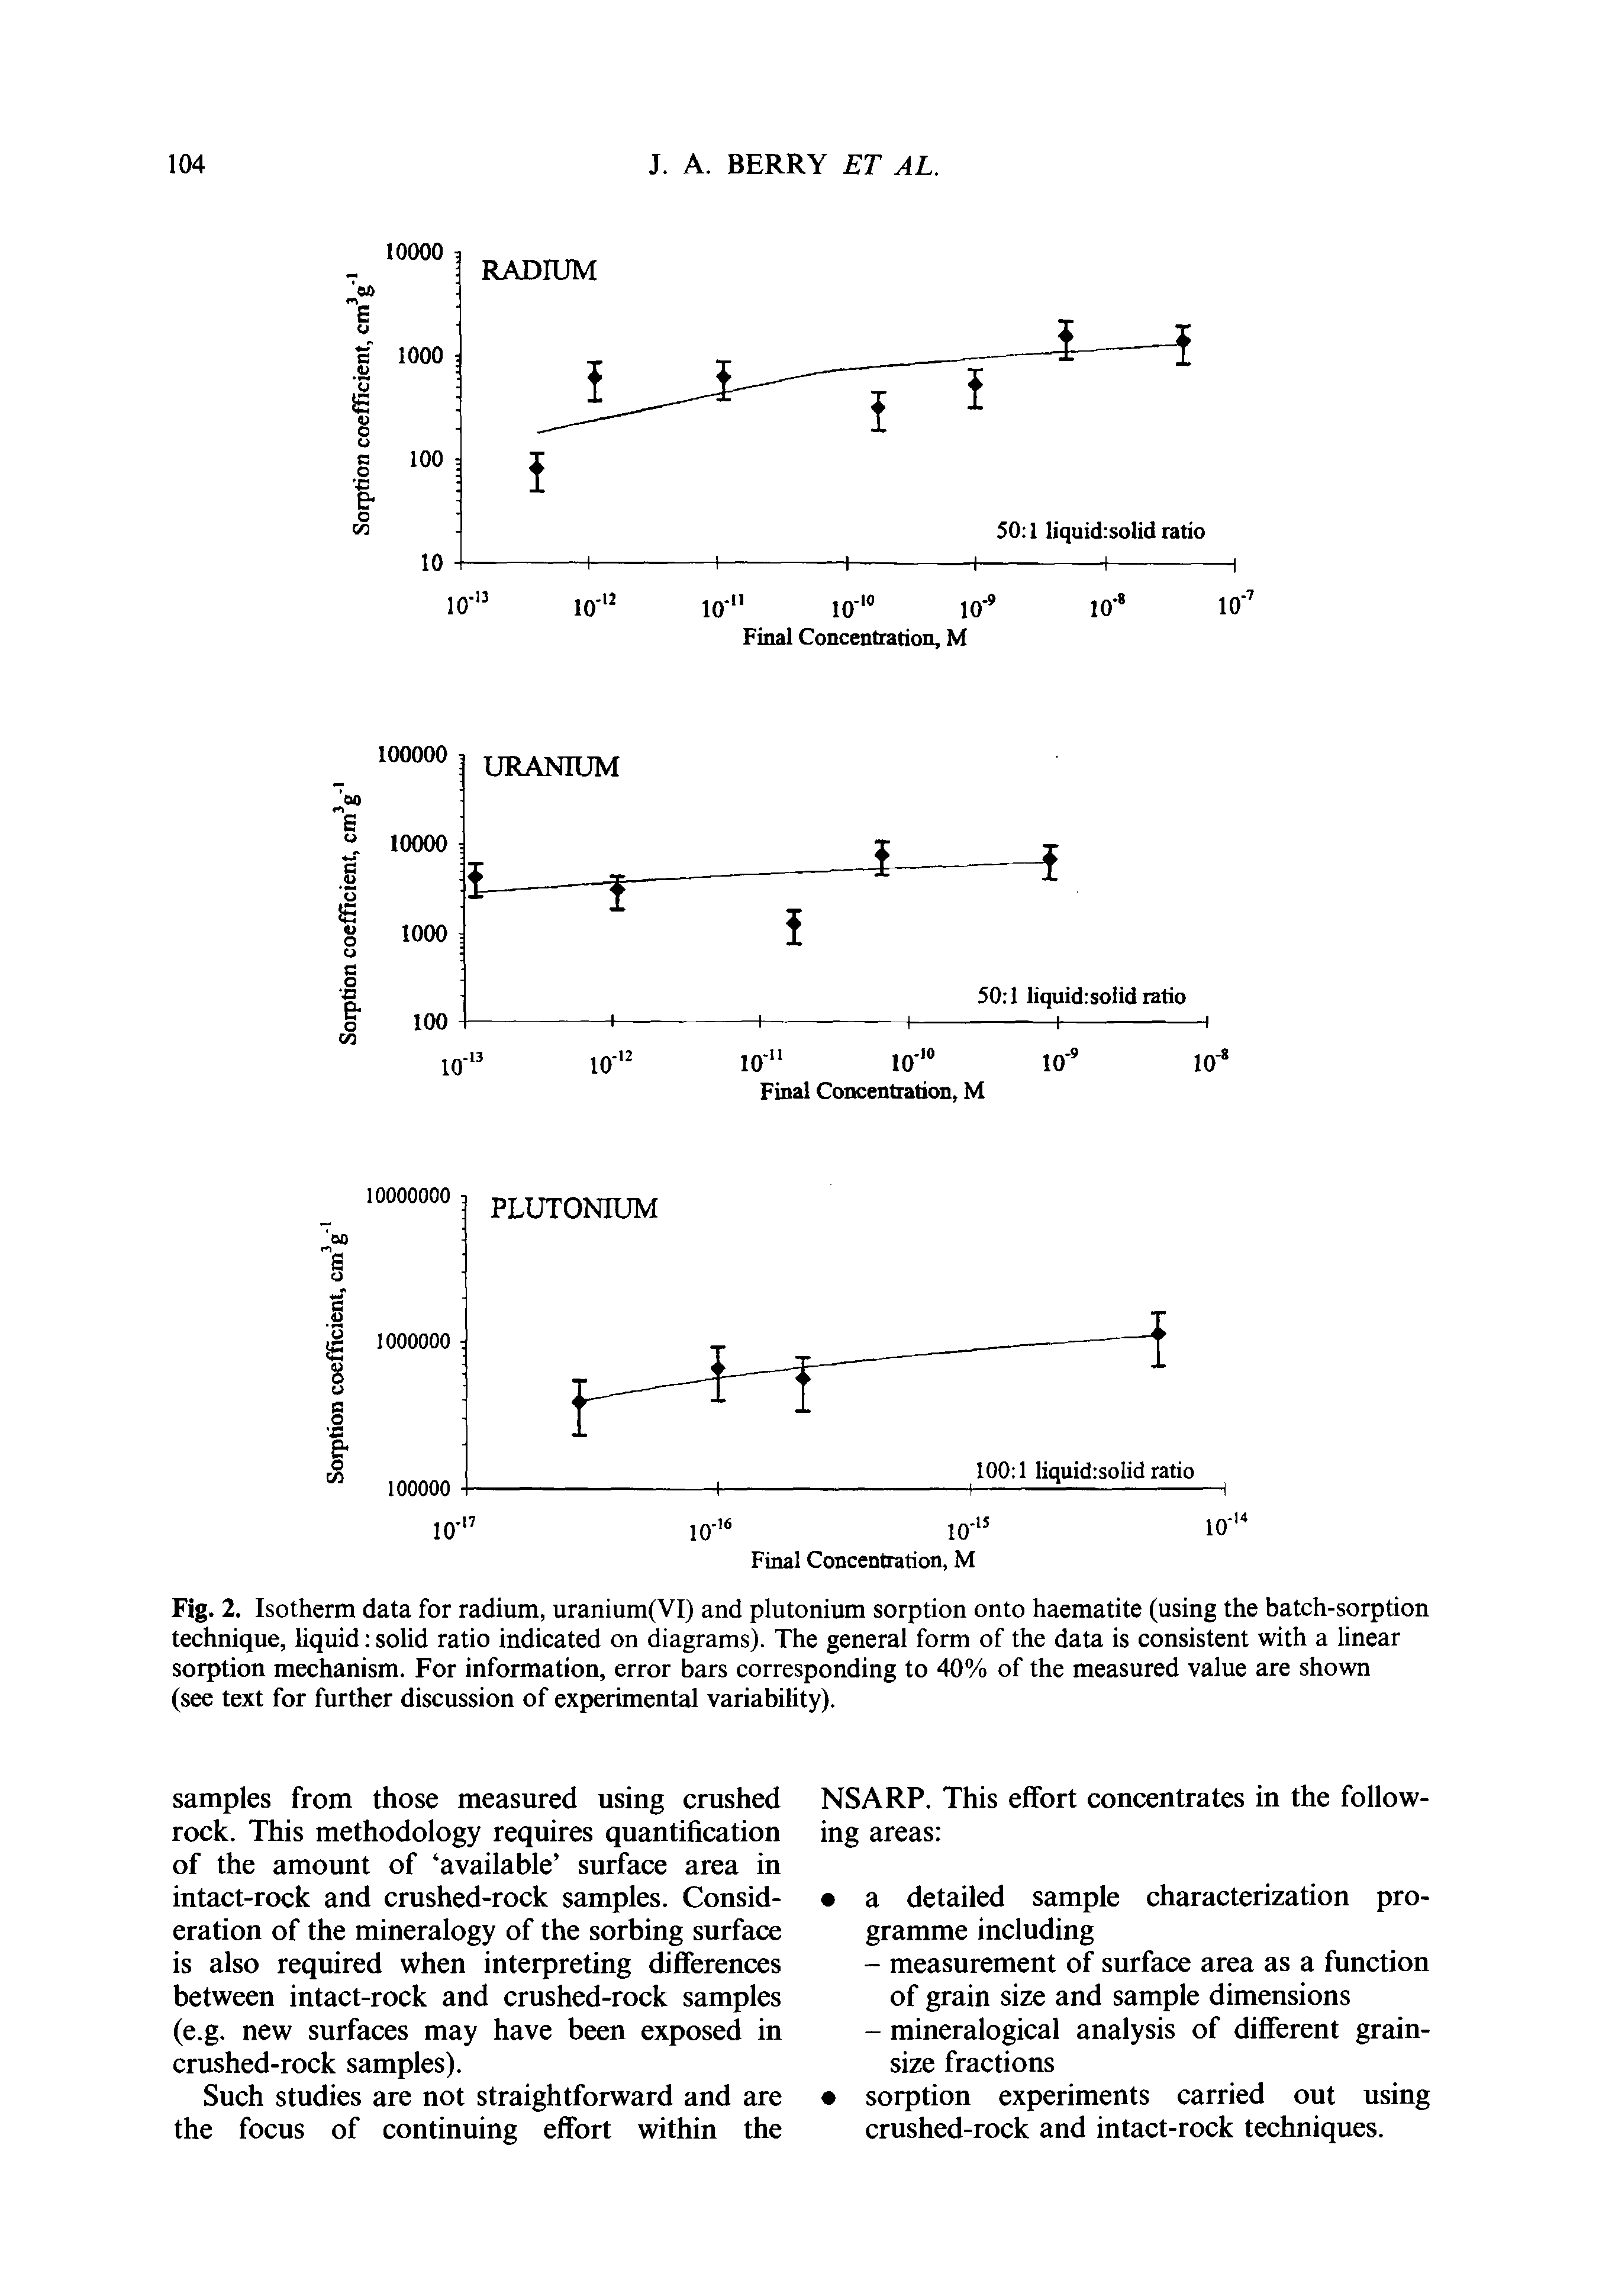 Fig. 2. Isotherm data for radium, uranium(VI) and plutonium sorption onto haematite (using the batch-sorption technique, liquid solid ratio indicated on diagrams). The general form of the data is consistent with a linear sorption mechanism. For information, error bars corresponding to 40% of the measured value are shovra (see text for further discussion of experimental variability).